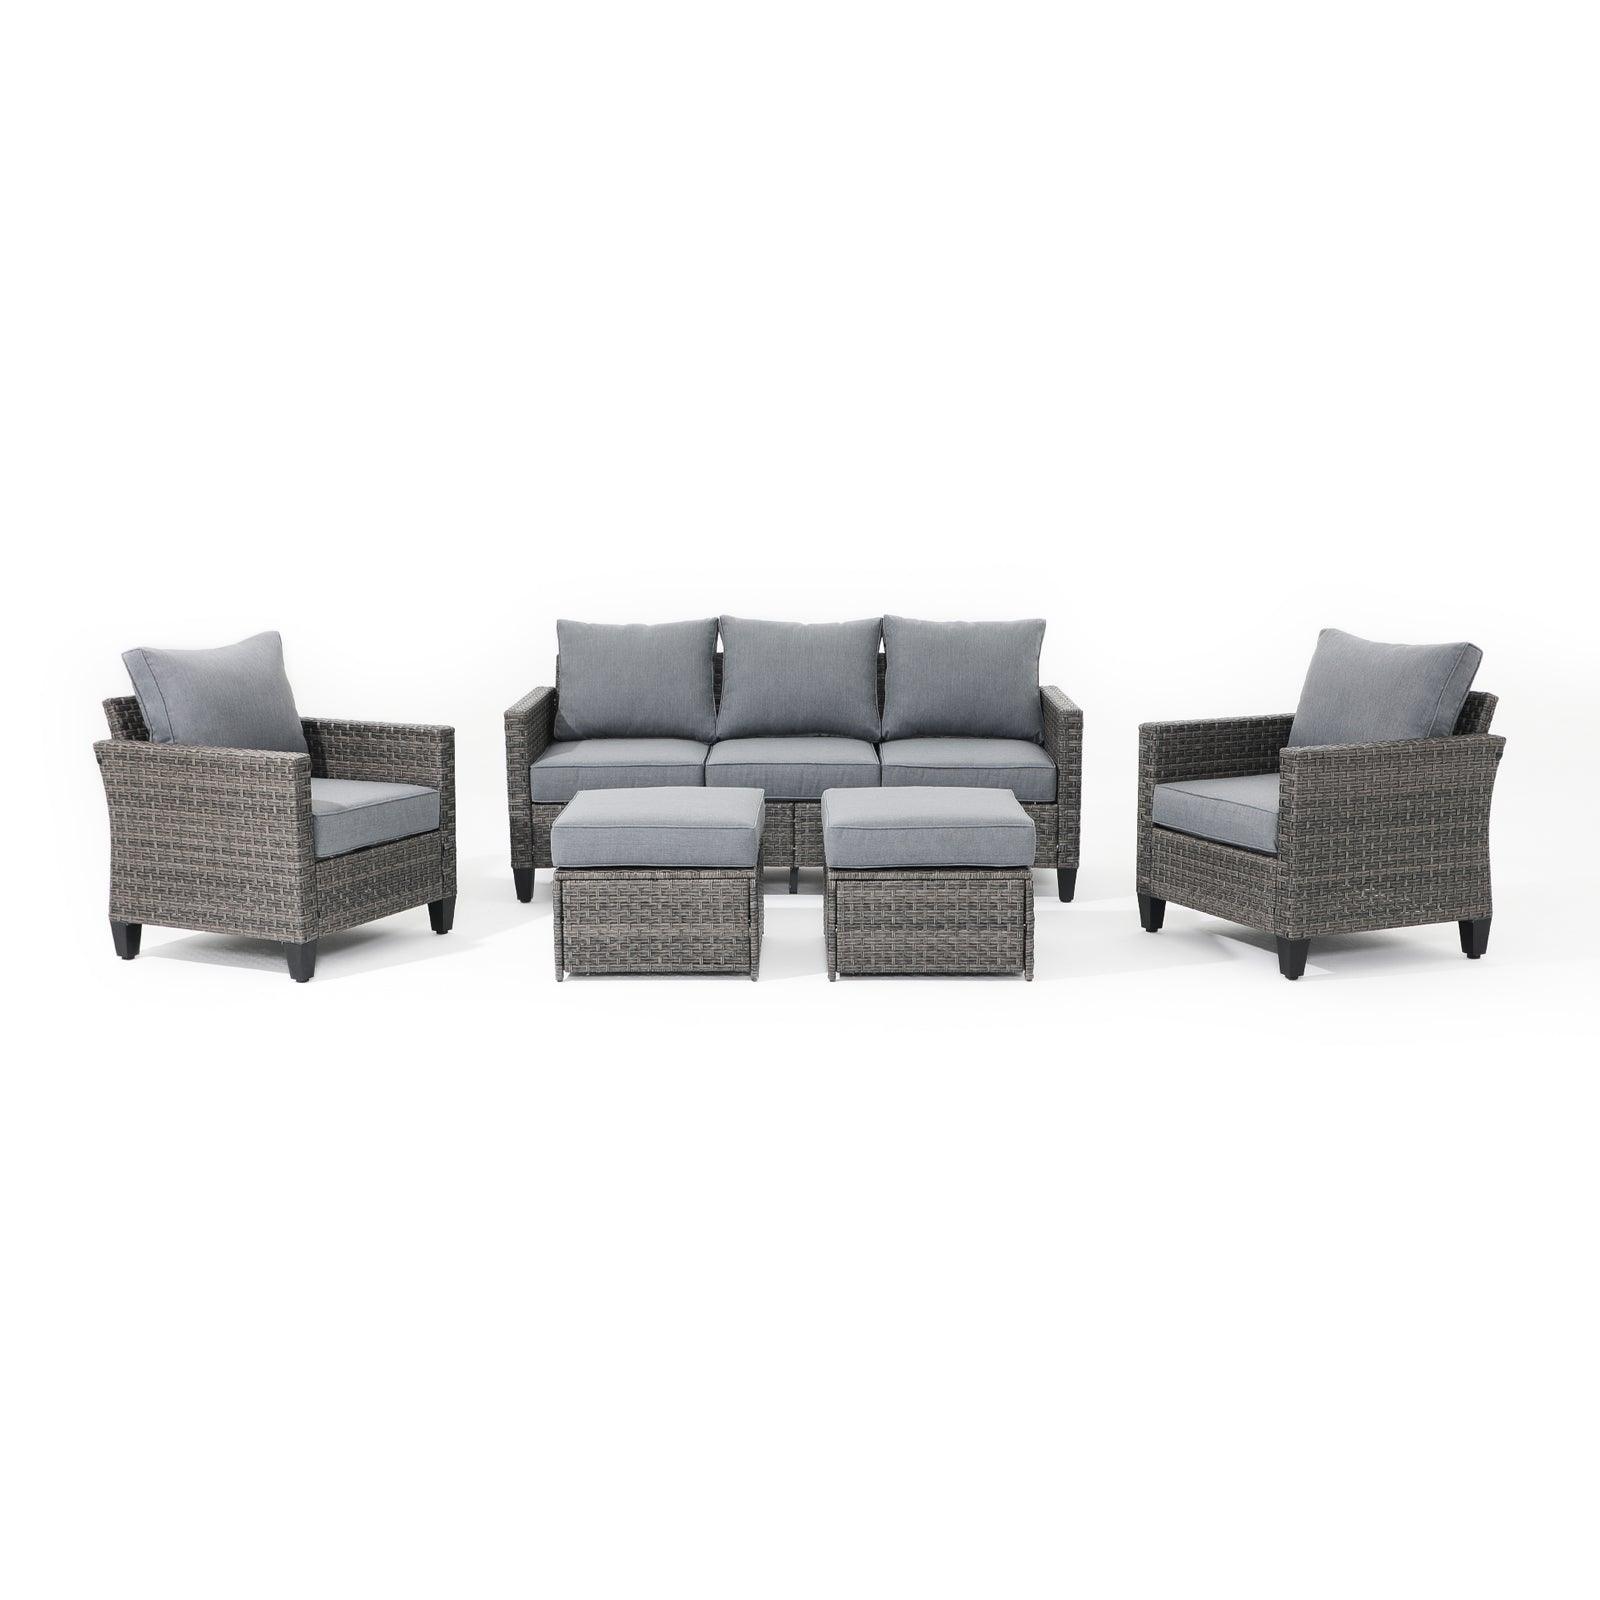 Ayia 5-Piece Grey outdoor Sofa Set with Rattan design, grey cushions, a 3-seater sofa, 2 arm chairs , 2 ottomans, front view- Jardina Furniture #color_Grey#piece_5-pc. with ottomans